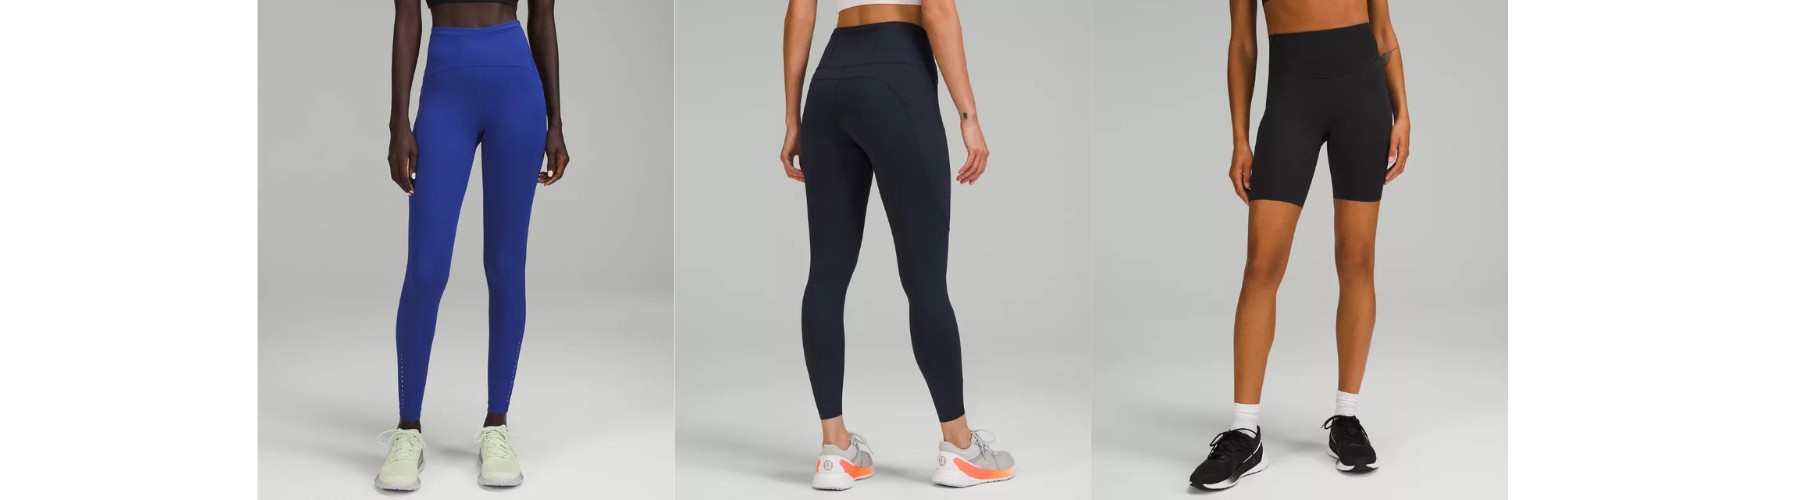 Which Lululemon women's running gear is worth investing in?